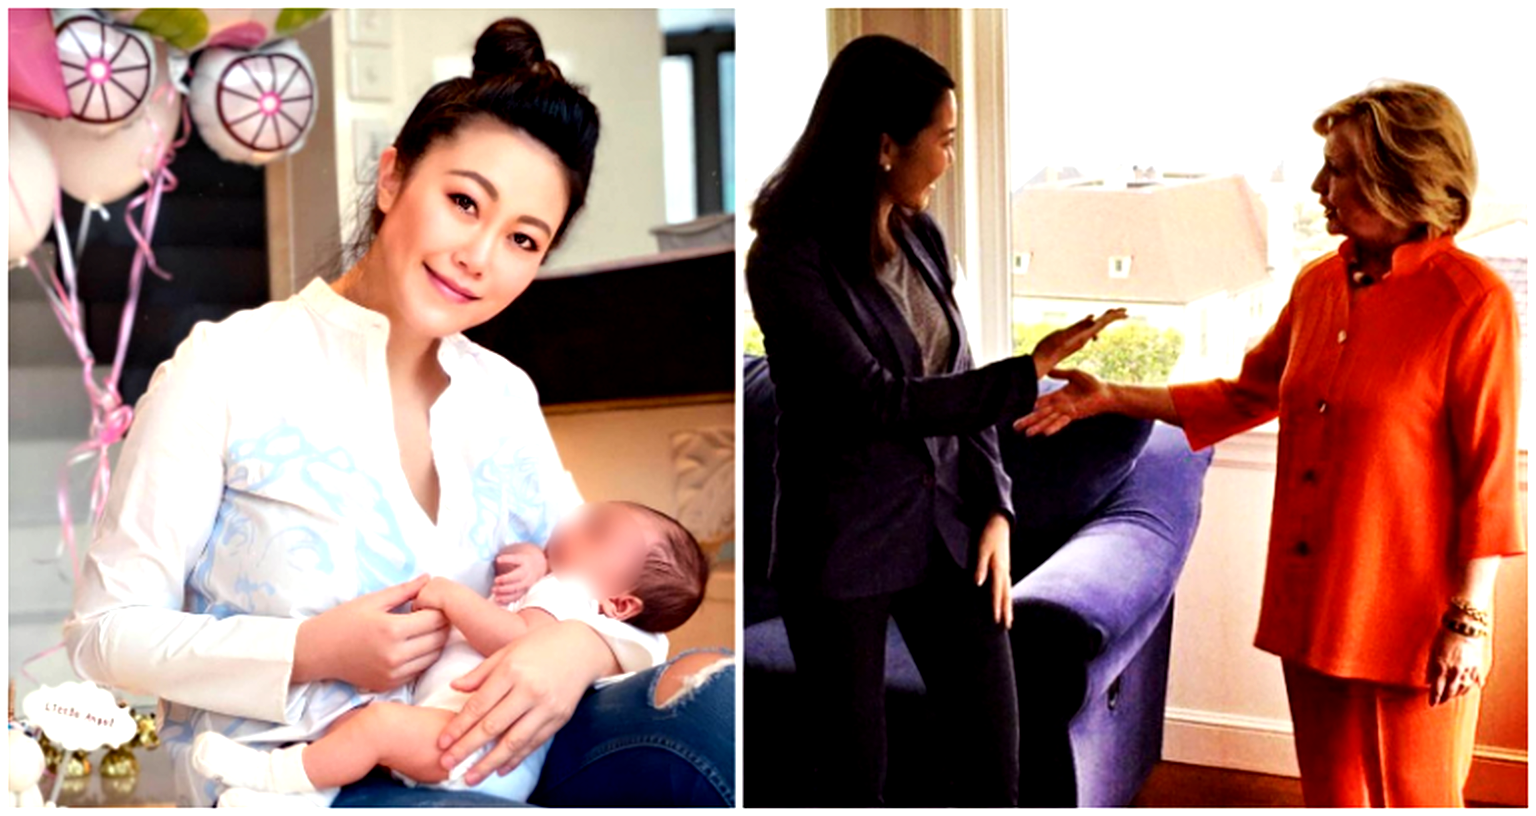 Chinese American Socialite ‘Jumps’ to Death While Holding 5-Month-Old Daughter